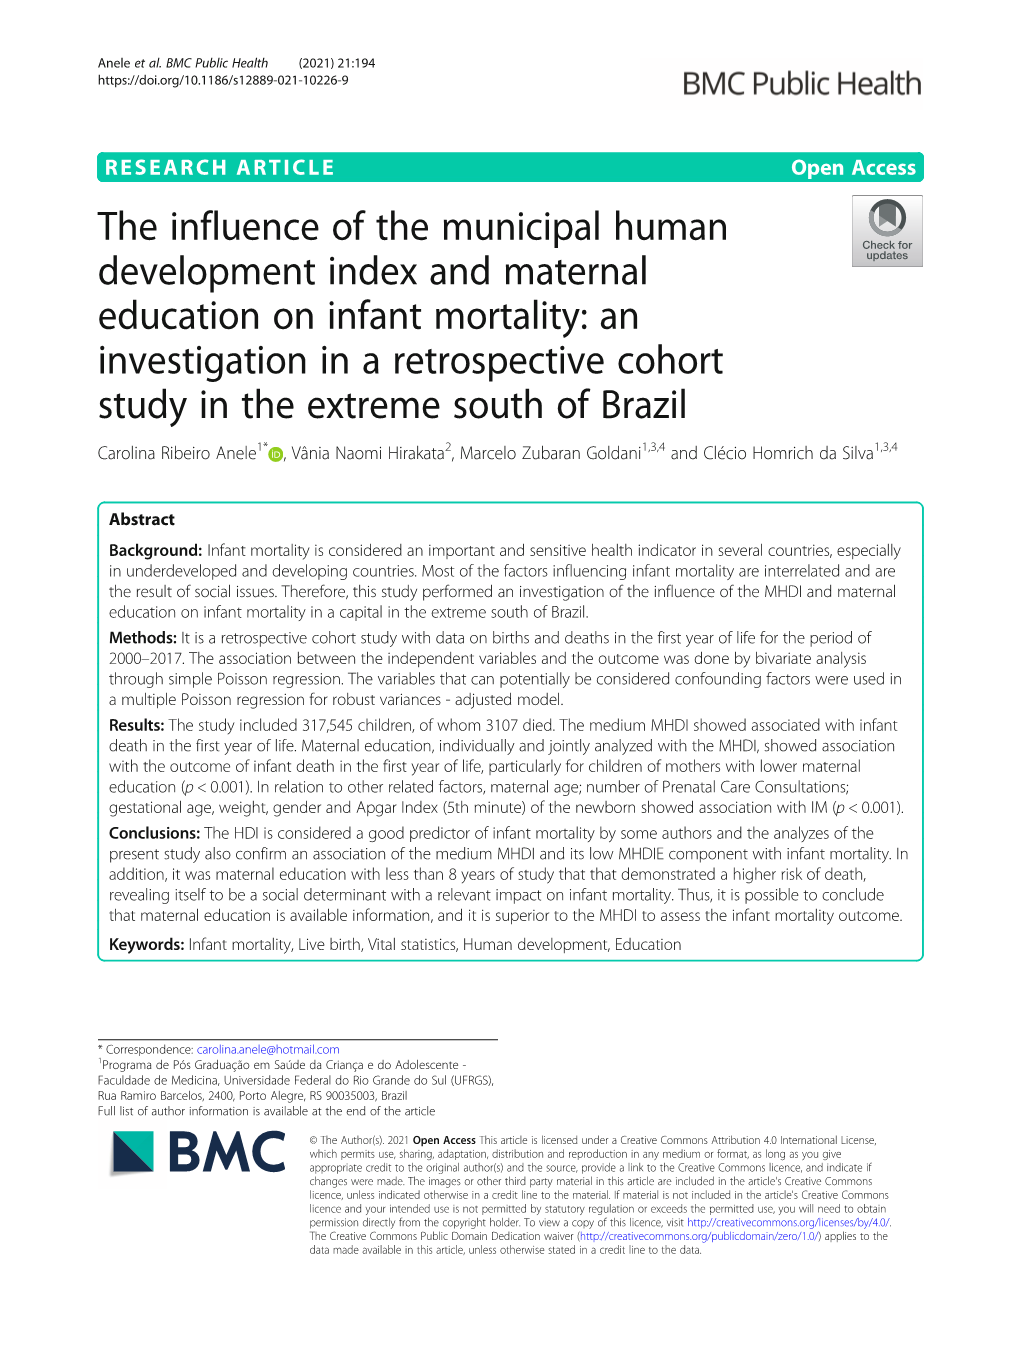 The Influence of the Municipal Human Development Index and Maternal Education on Infant Mortality